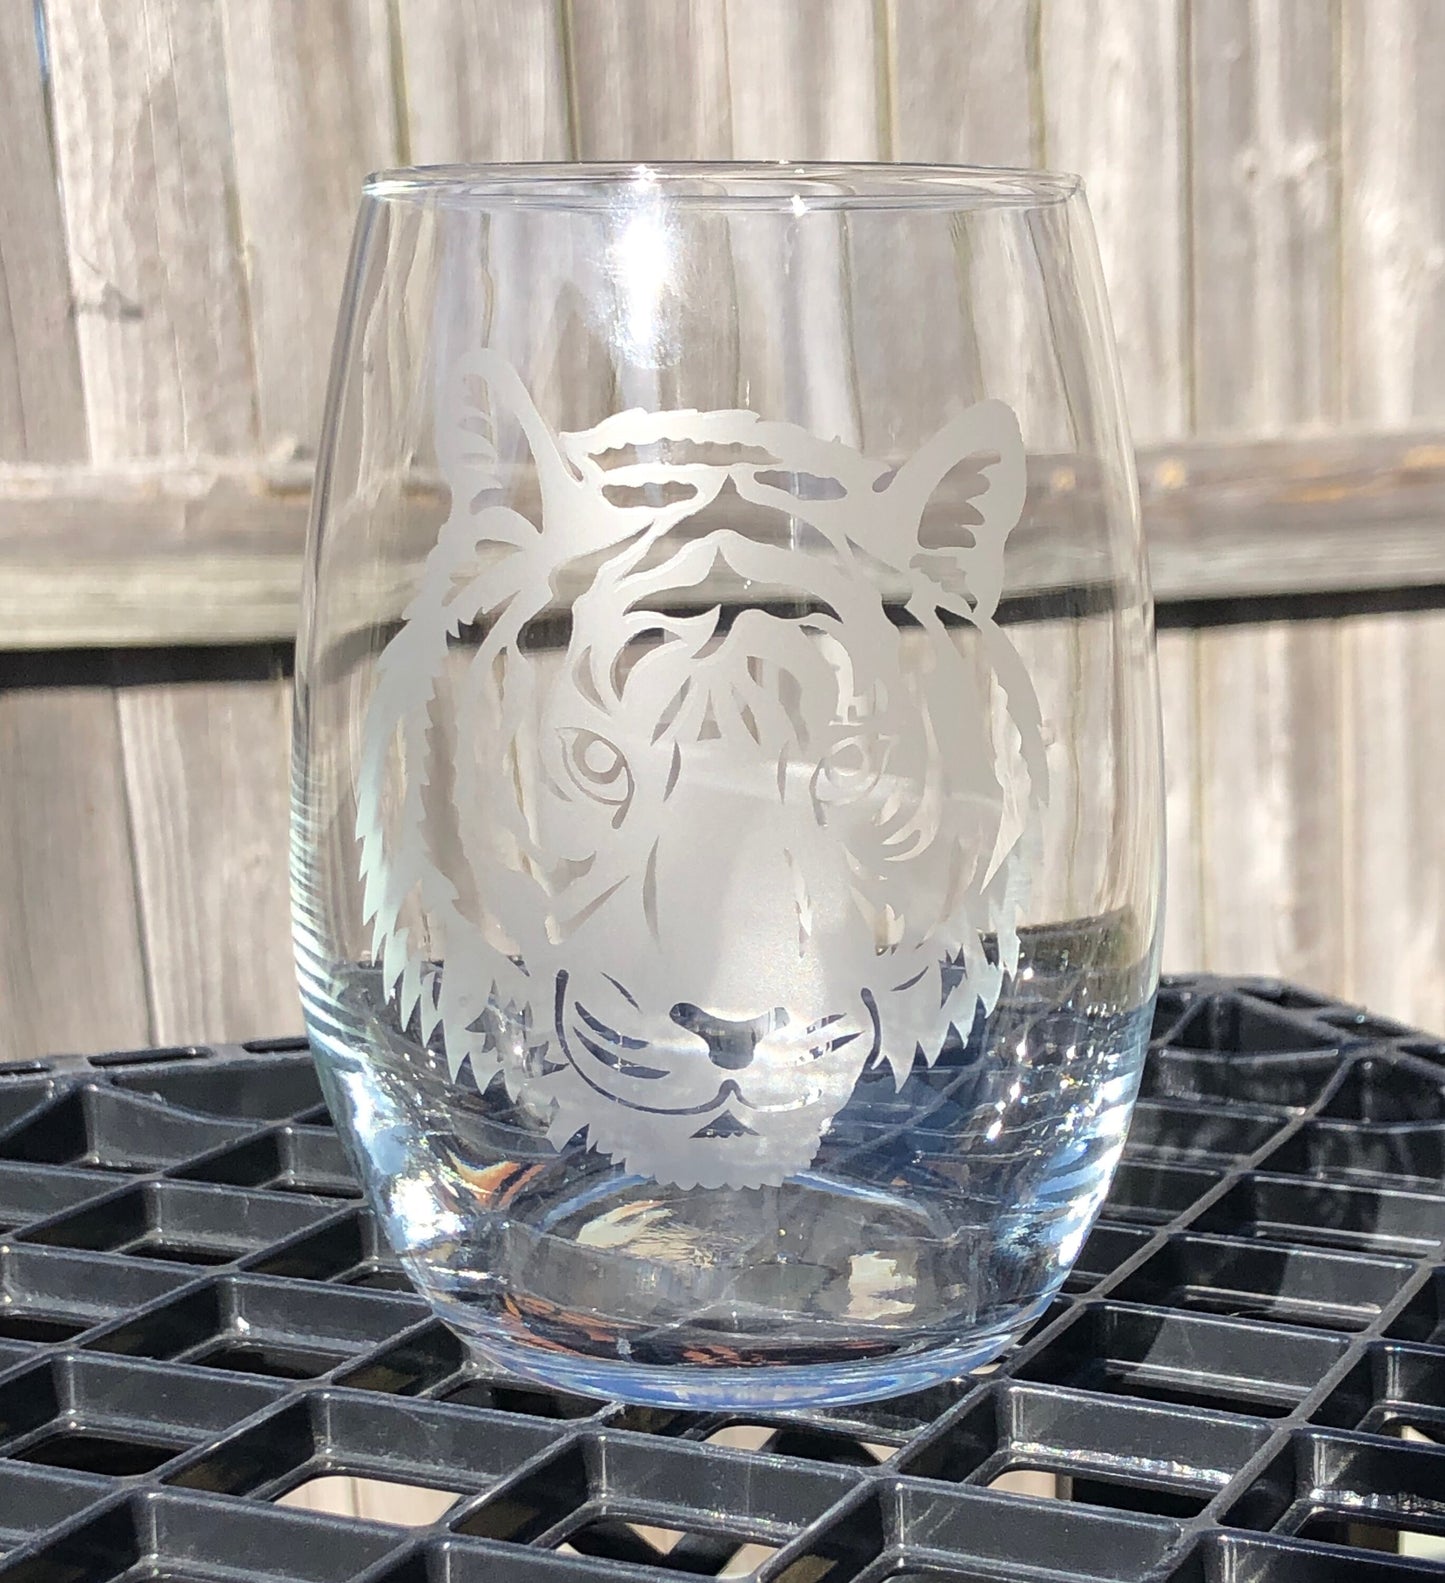 Tiger wine glass, Tiger Etched whiskey glass, Tiger Etched beer glass, Tiger personalized Tiger glass, Custom etched Tiger glass